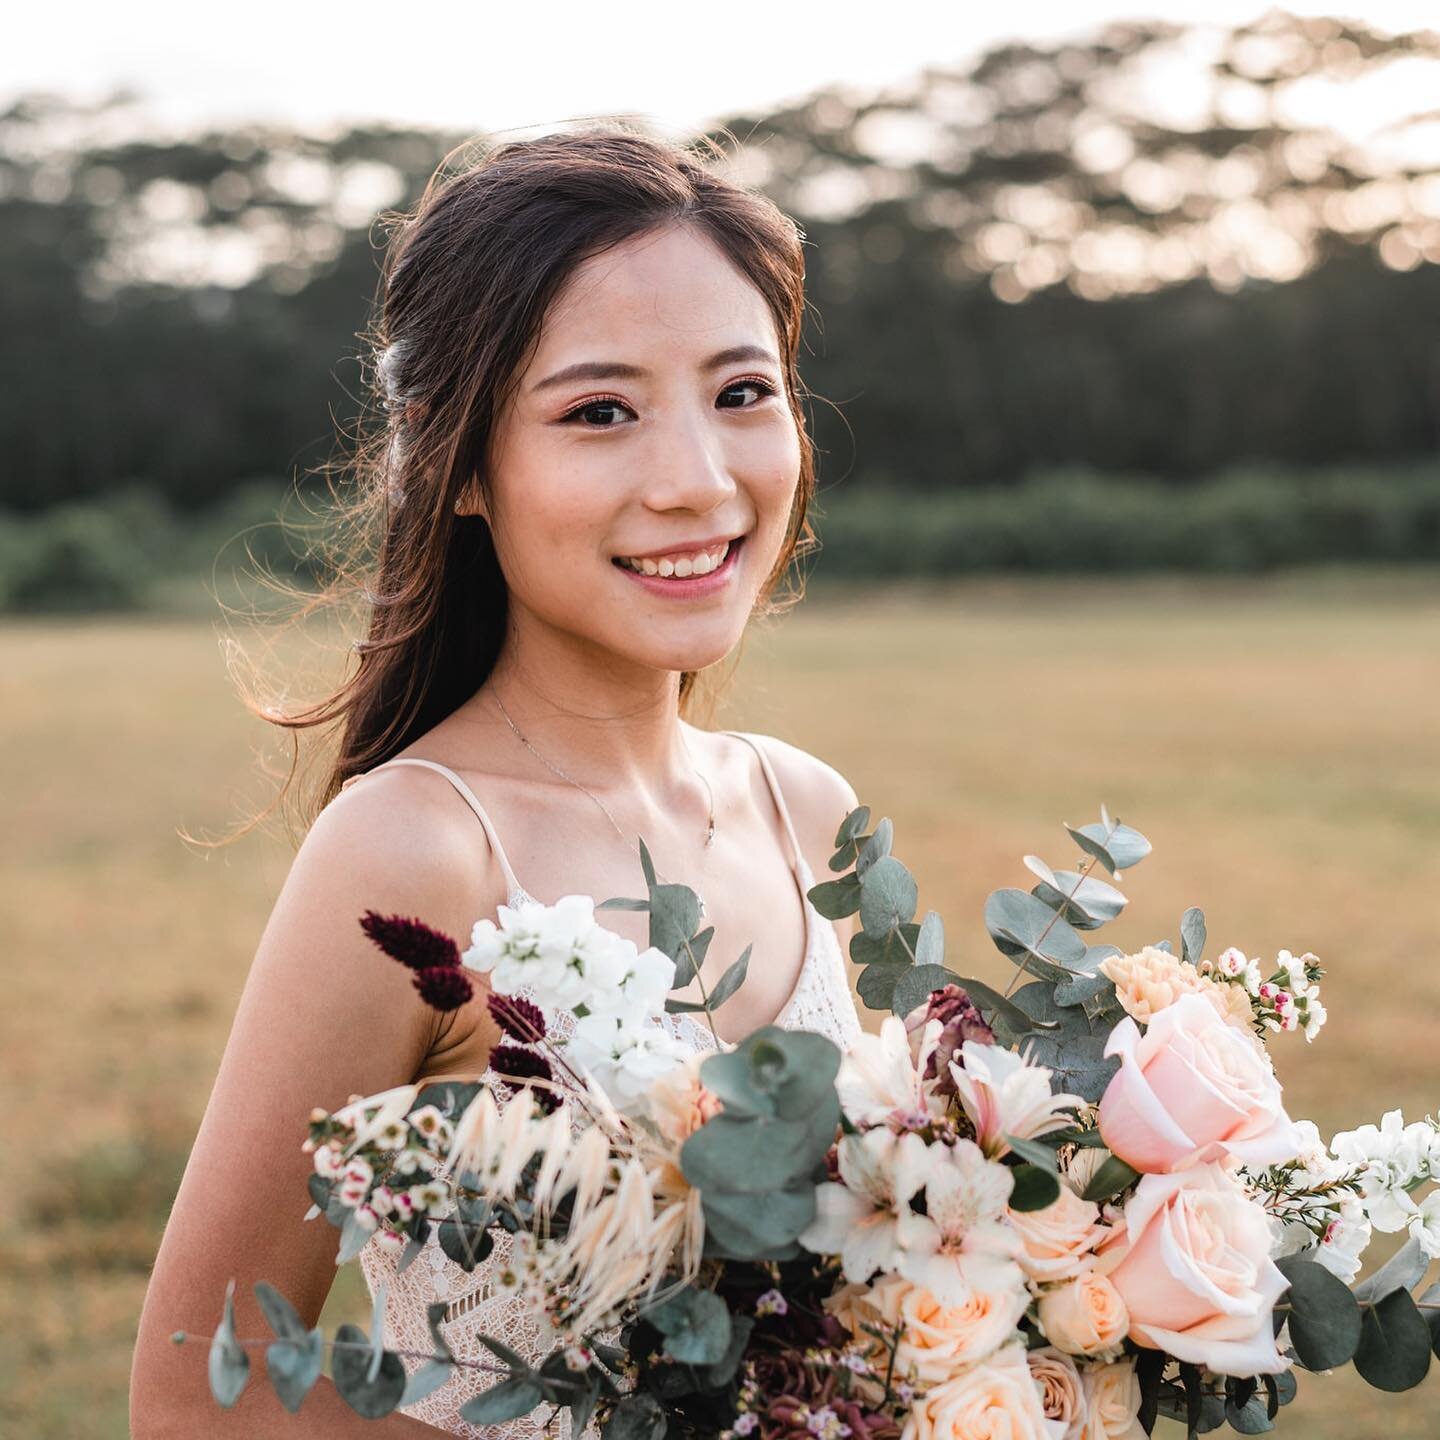 So in love with @lynnweee smile!
Also thank you for dropping such a lovely review for me too. 🌸
.
.
📸: @cepheusphotography 
🎥: @momentold 
💐: @lizflorals